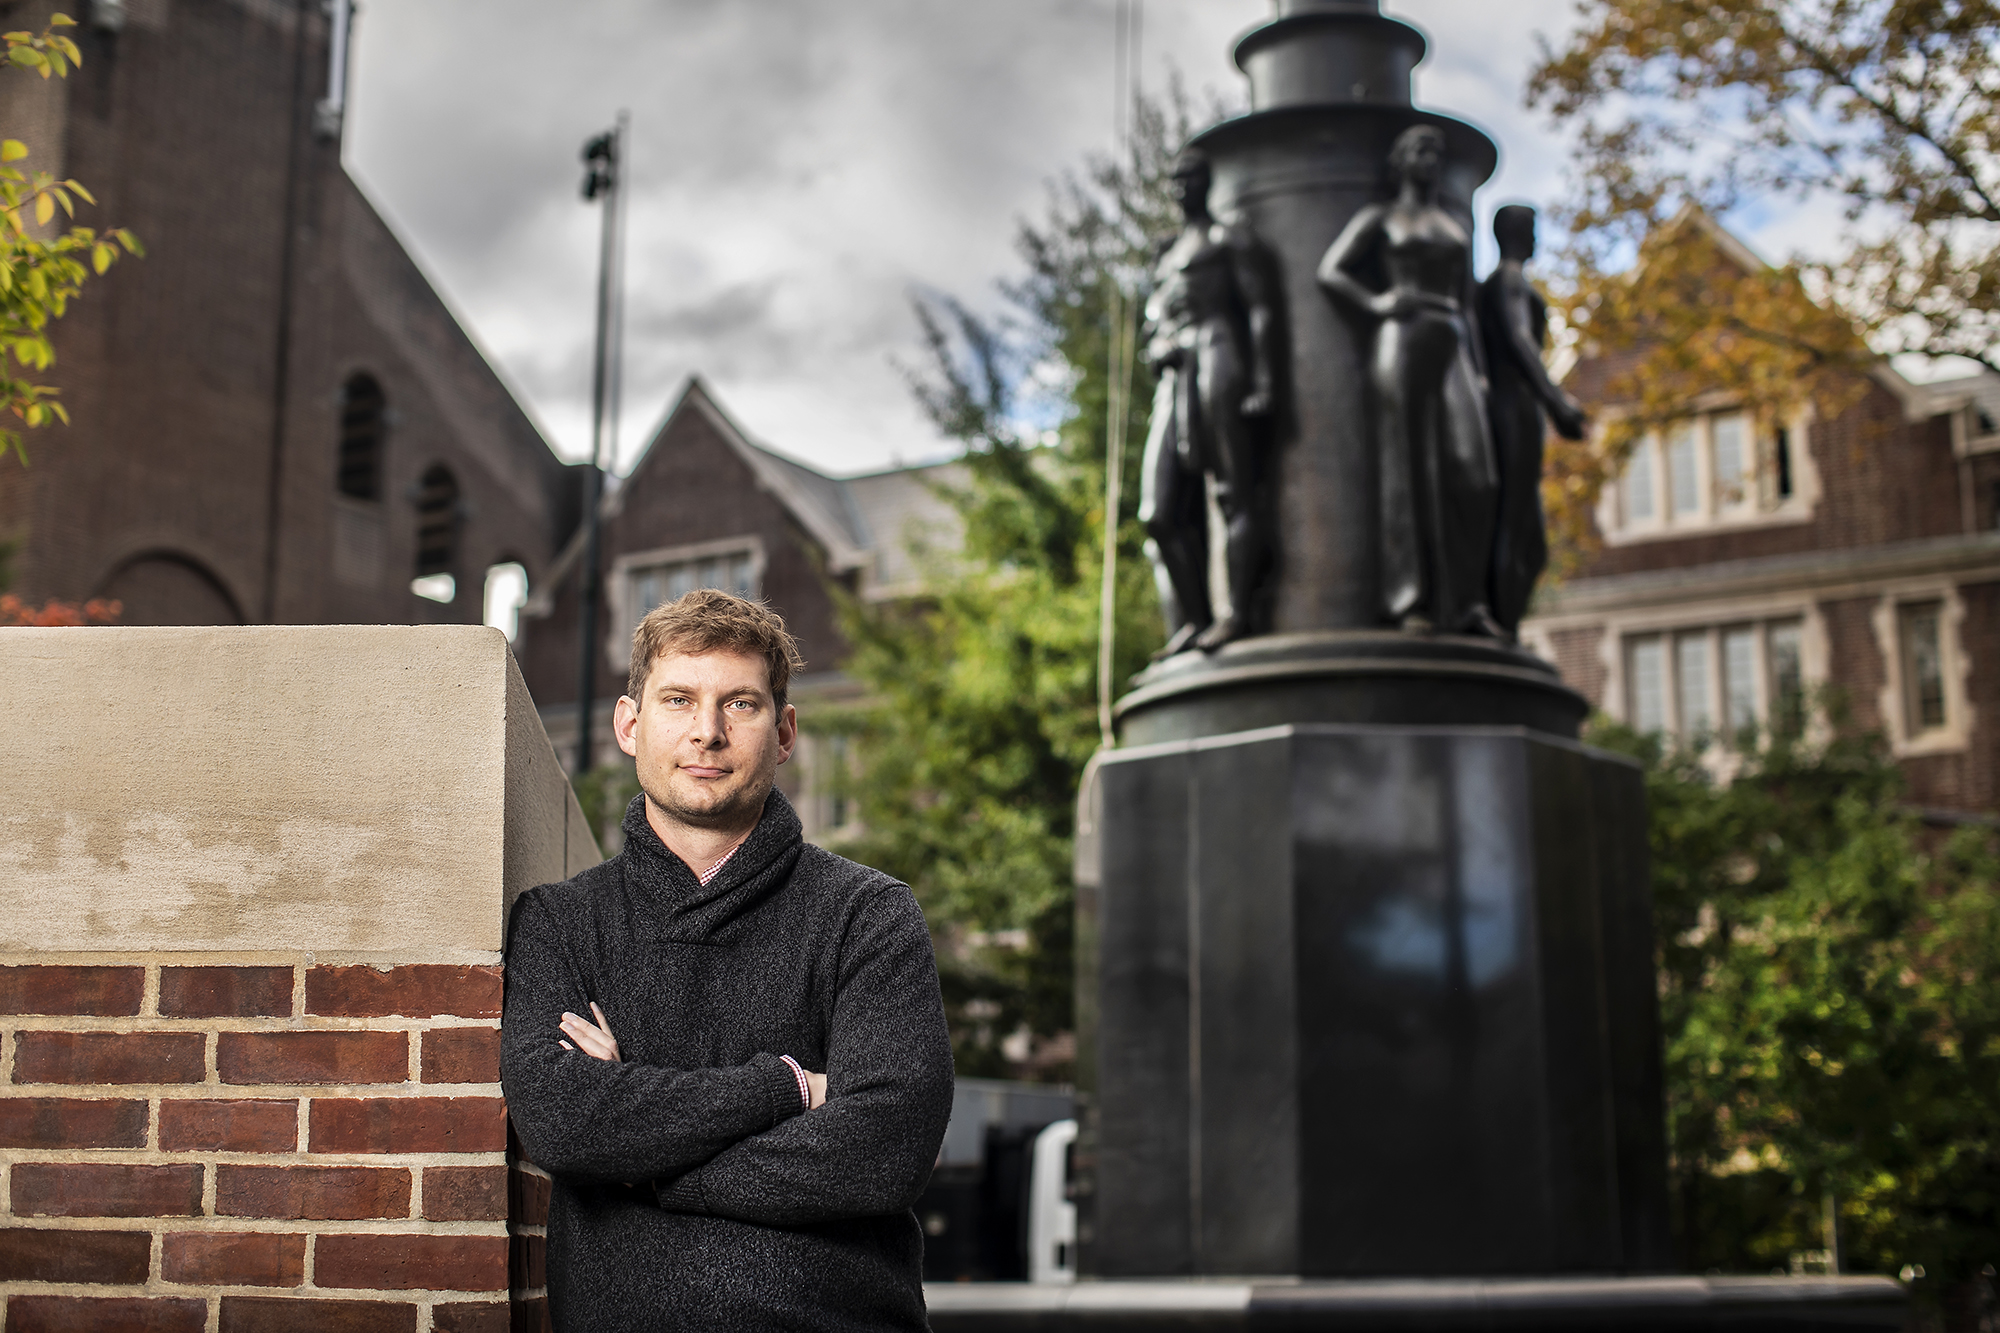 Jason Hartwig stands with arms crossed in front of a statue on Penn’s campus.